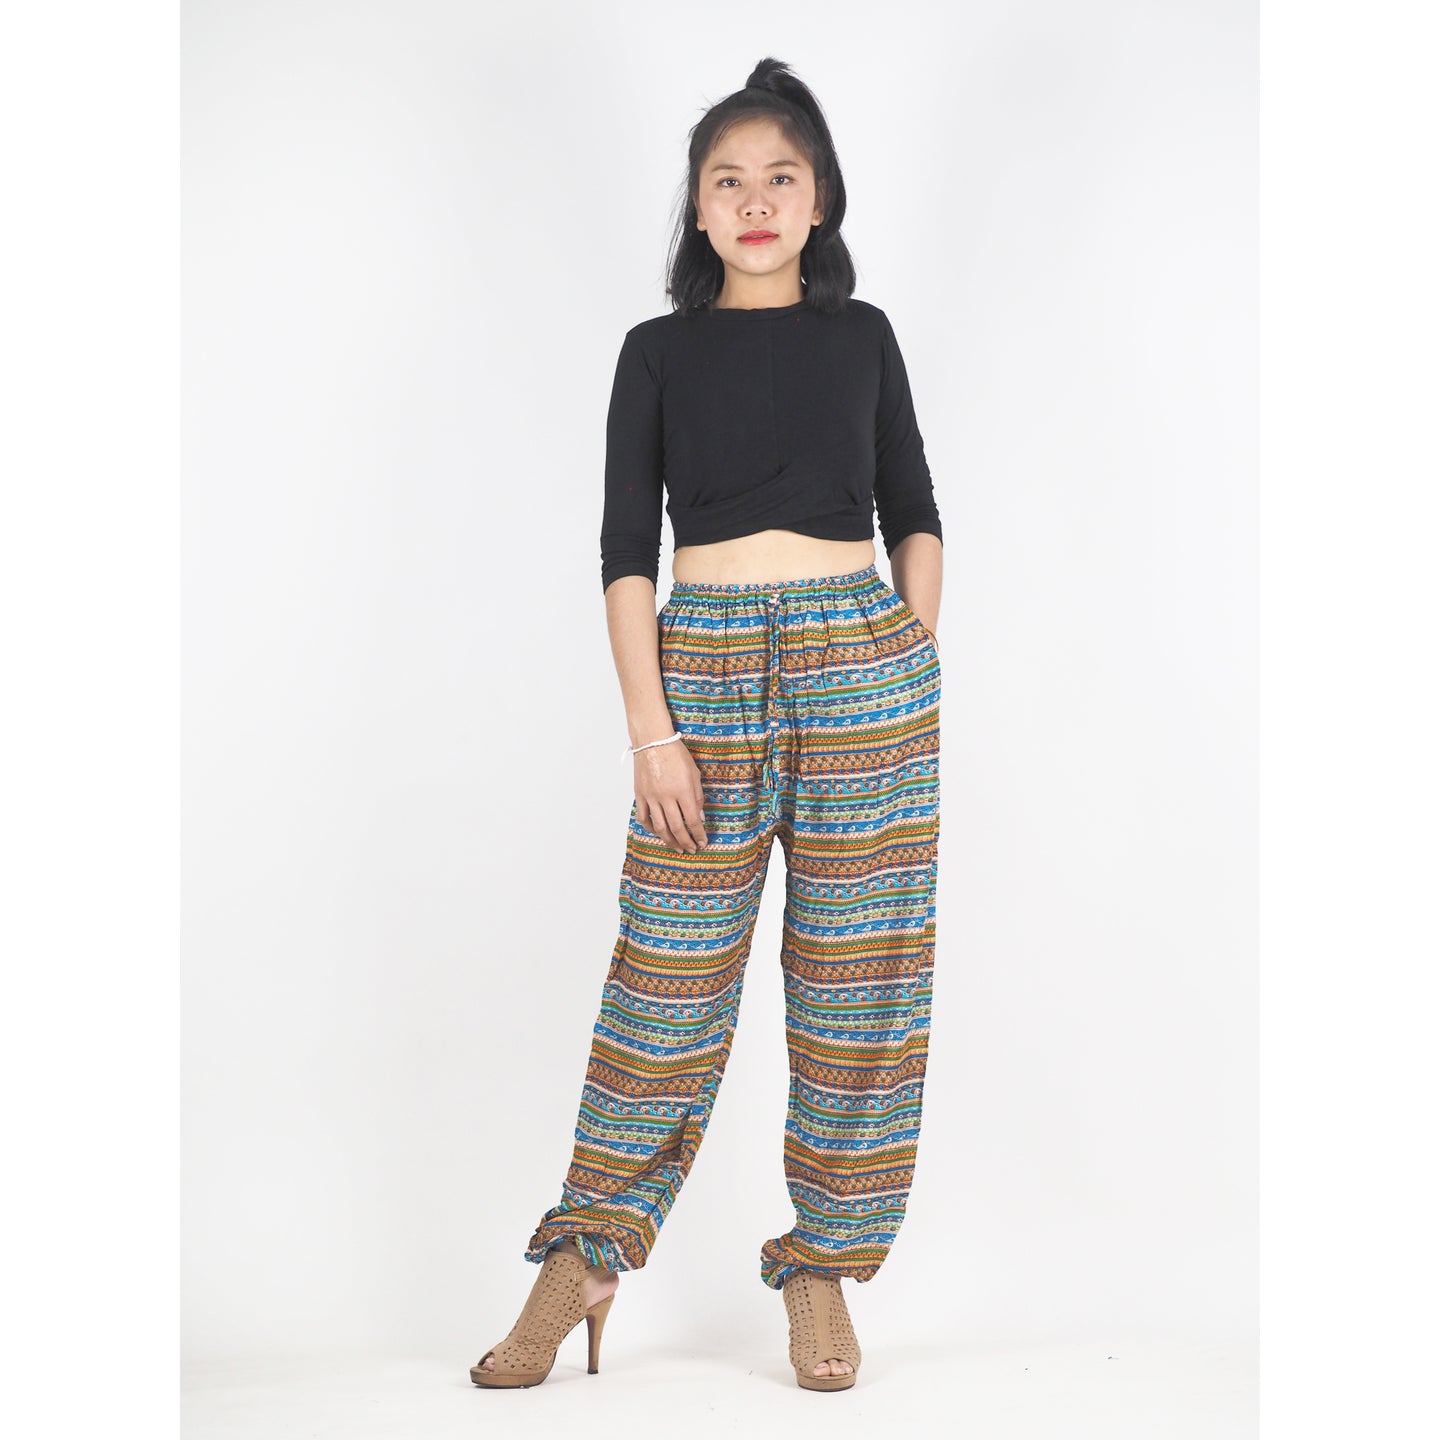 Colorful Stripes Unisex Drawstring Genie Pants in Yellow PP0110 020006 07